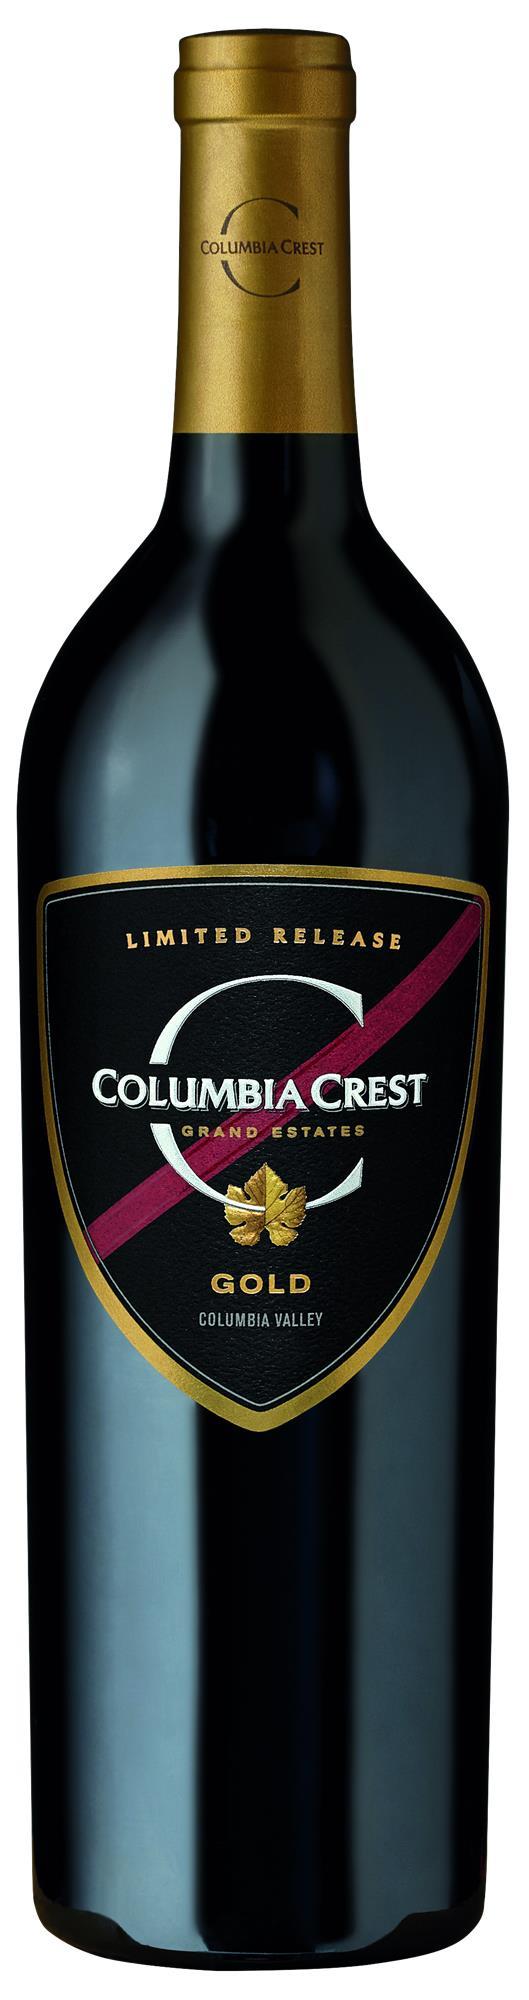 COLUMBIA CREST GOLD LIMITED RELEASE, 2019 COLUMBIA CREST